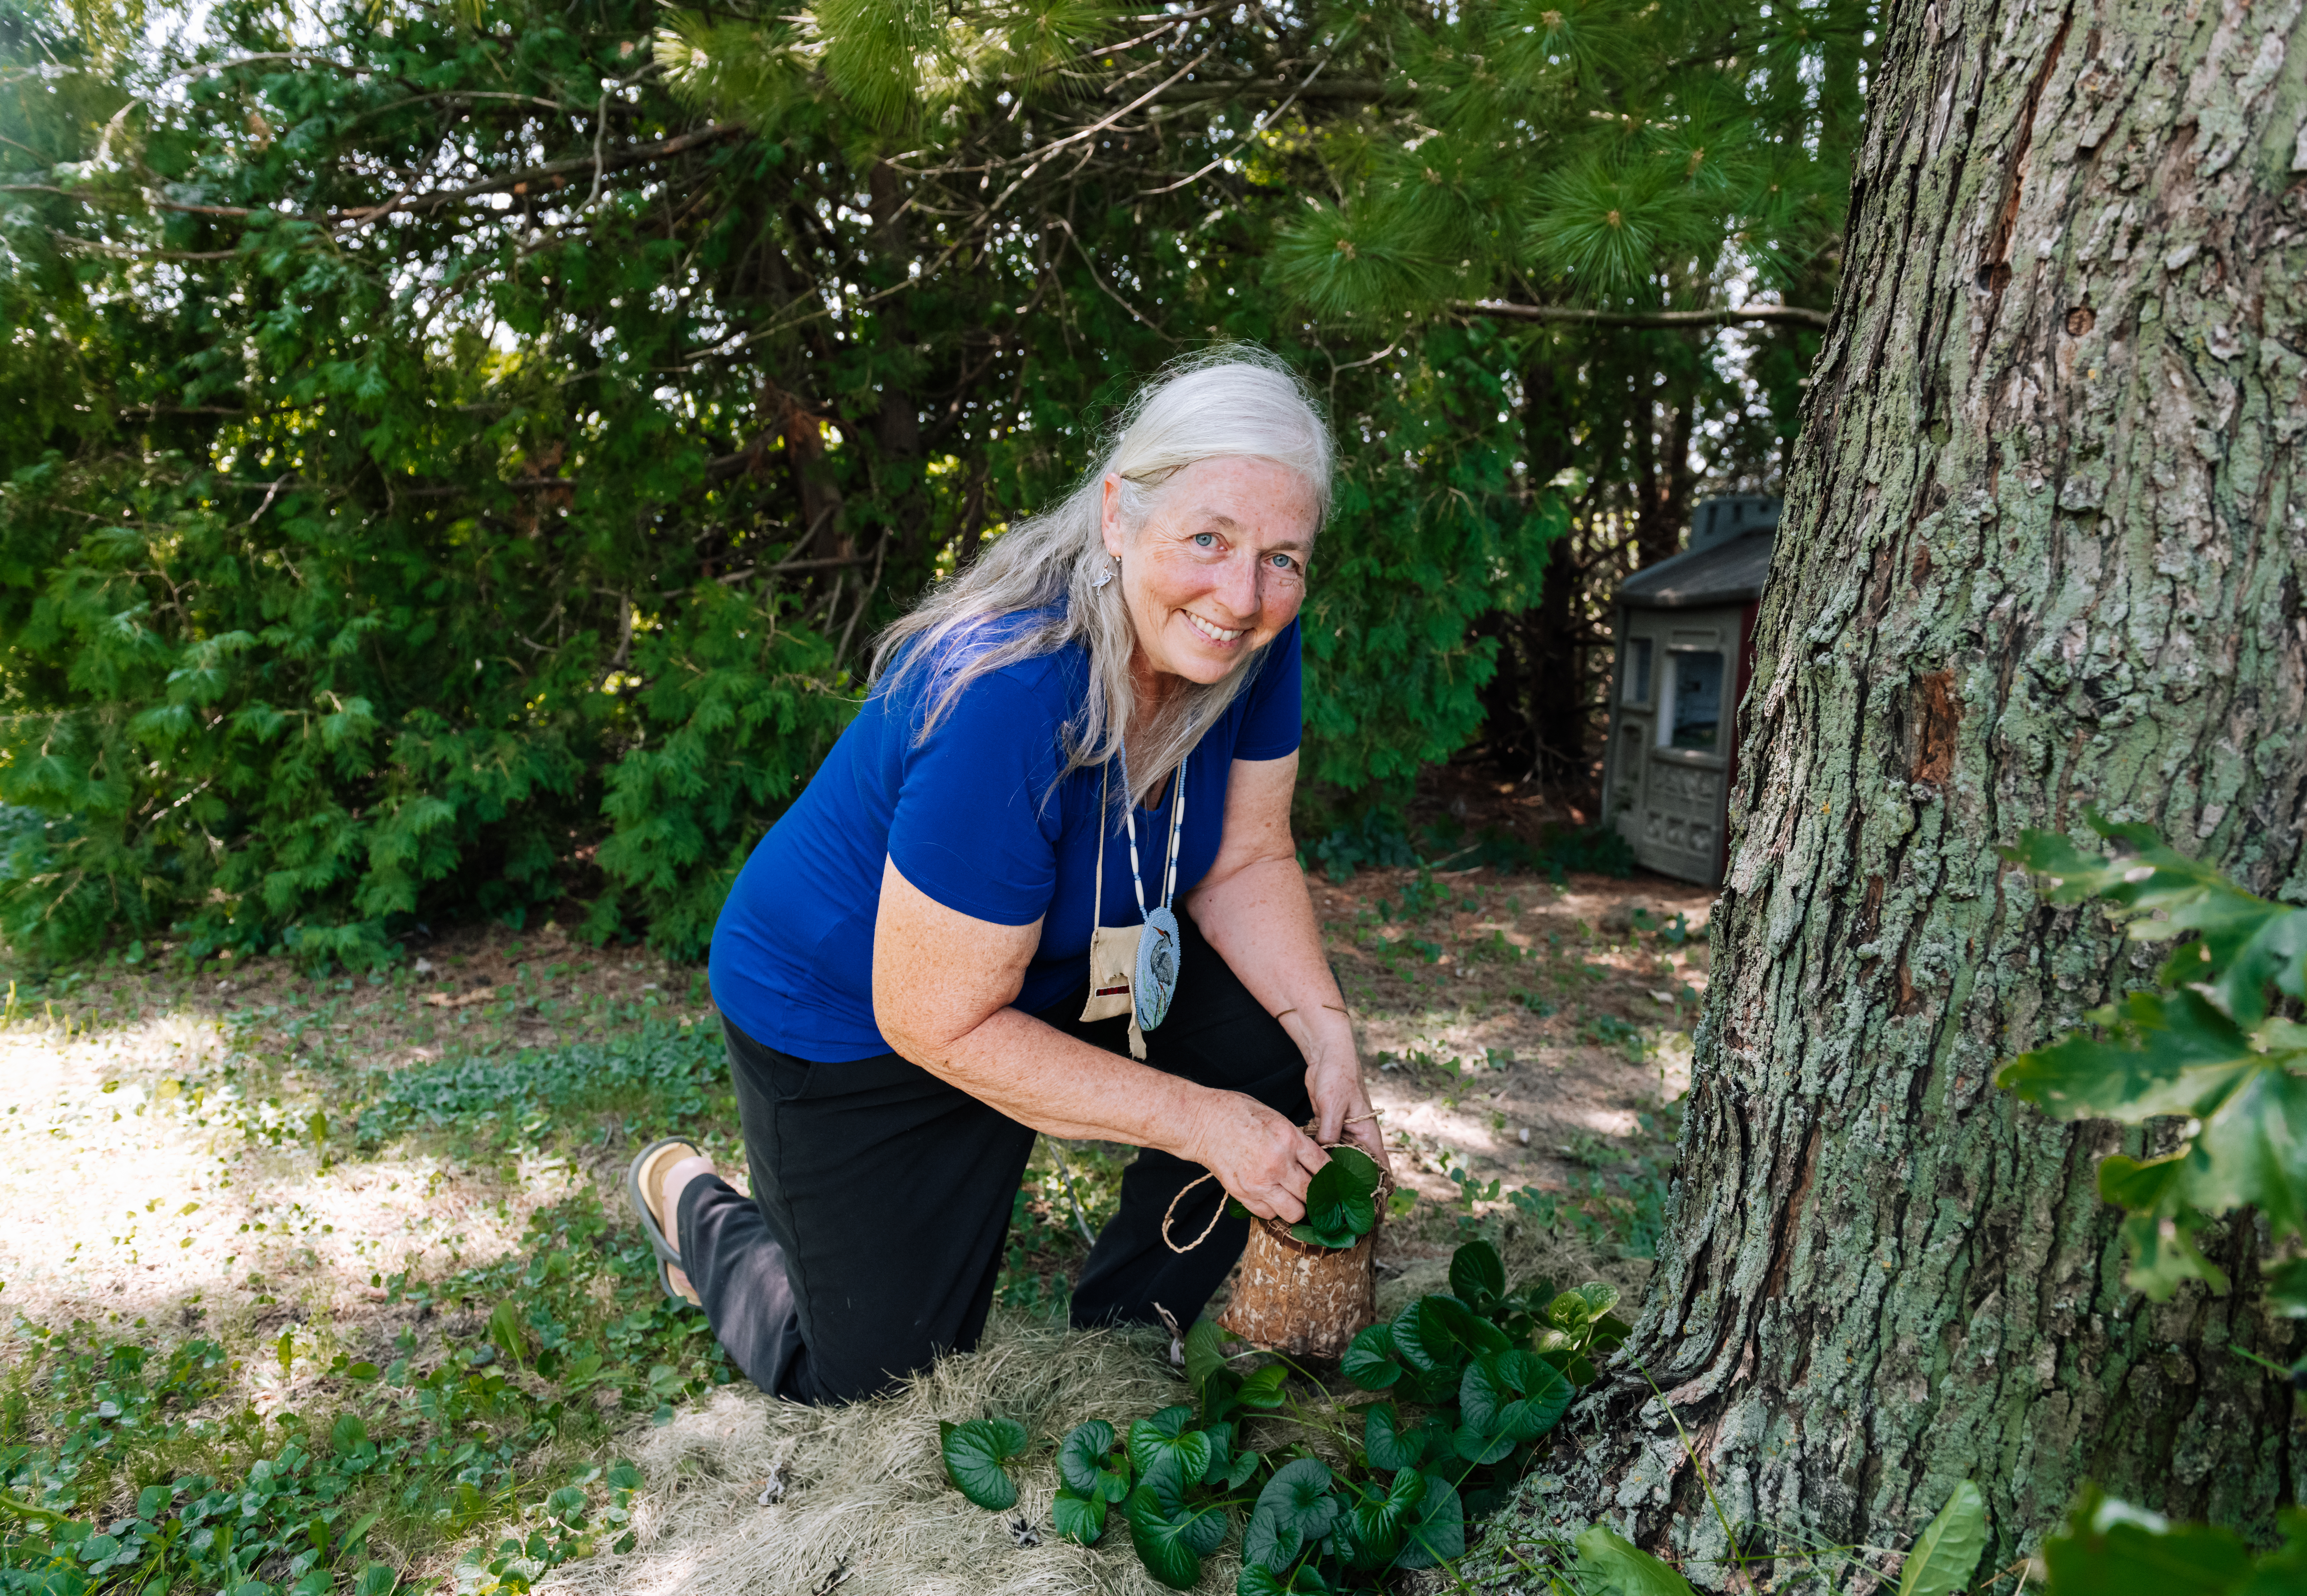 A person of light skin tone and greying long hair smiles as they forage violet leaves in their backyard. They are wearing a bright blue T-shirt and black pants, and are kneeling on one leg to reach the plant.